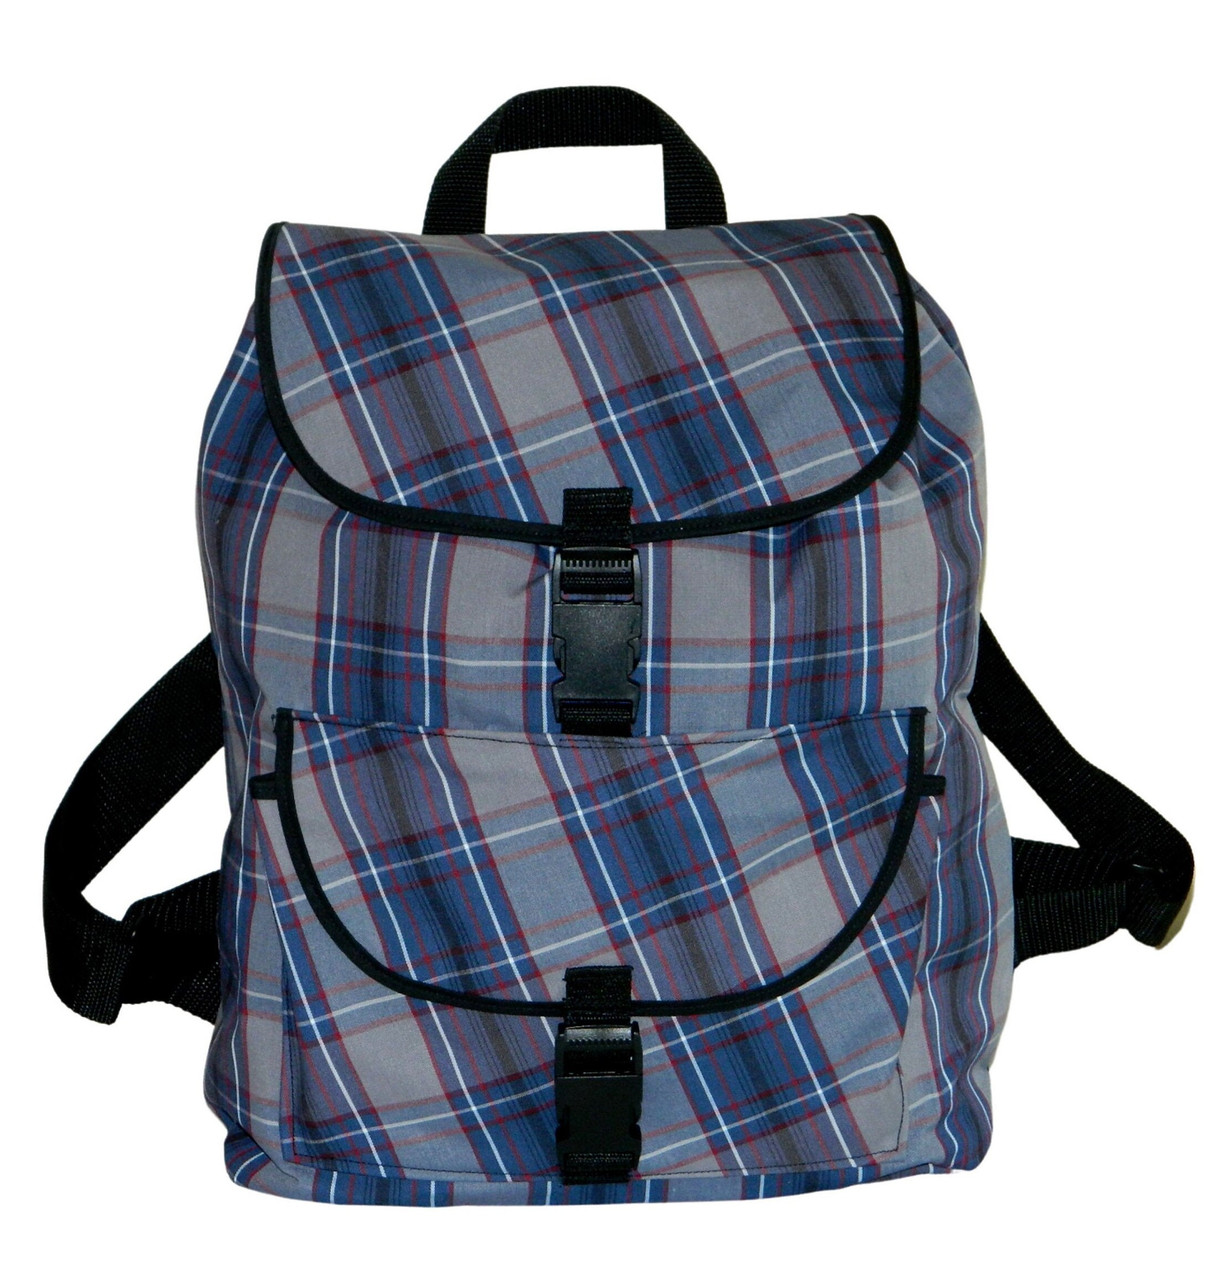 Navy, Gray & Red Plaid Backpack